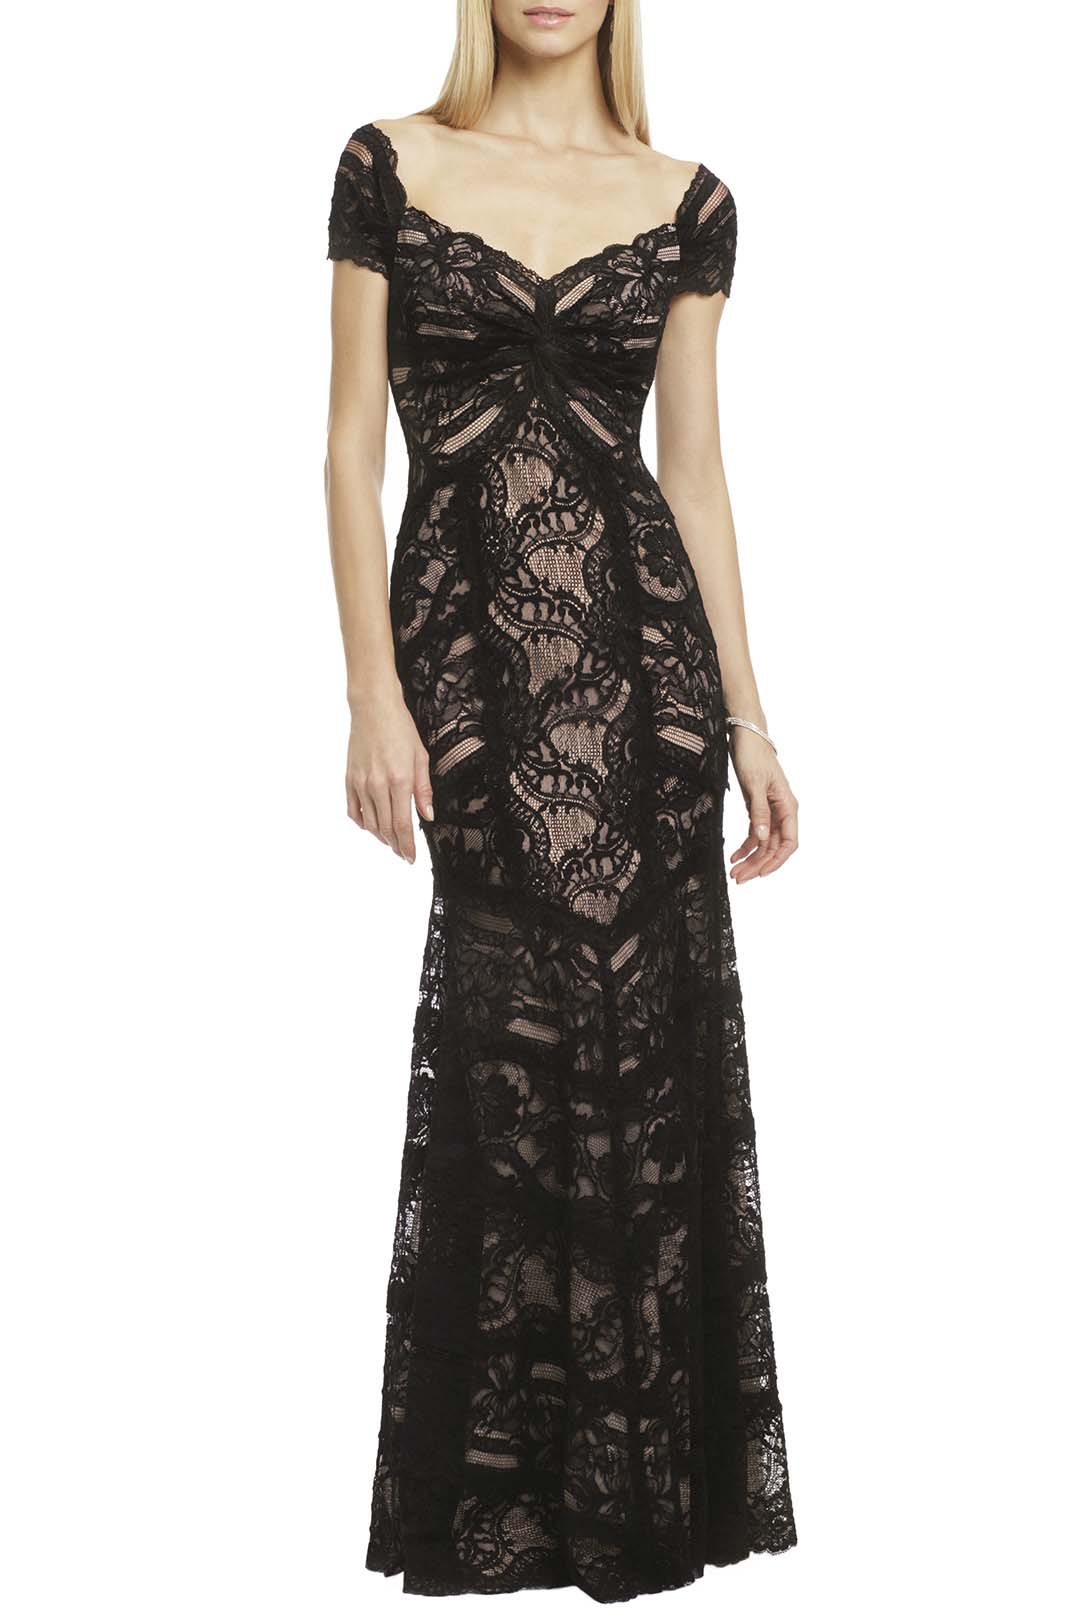 nicole miller tempted by you gown